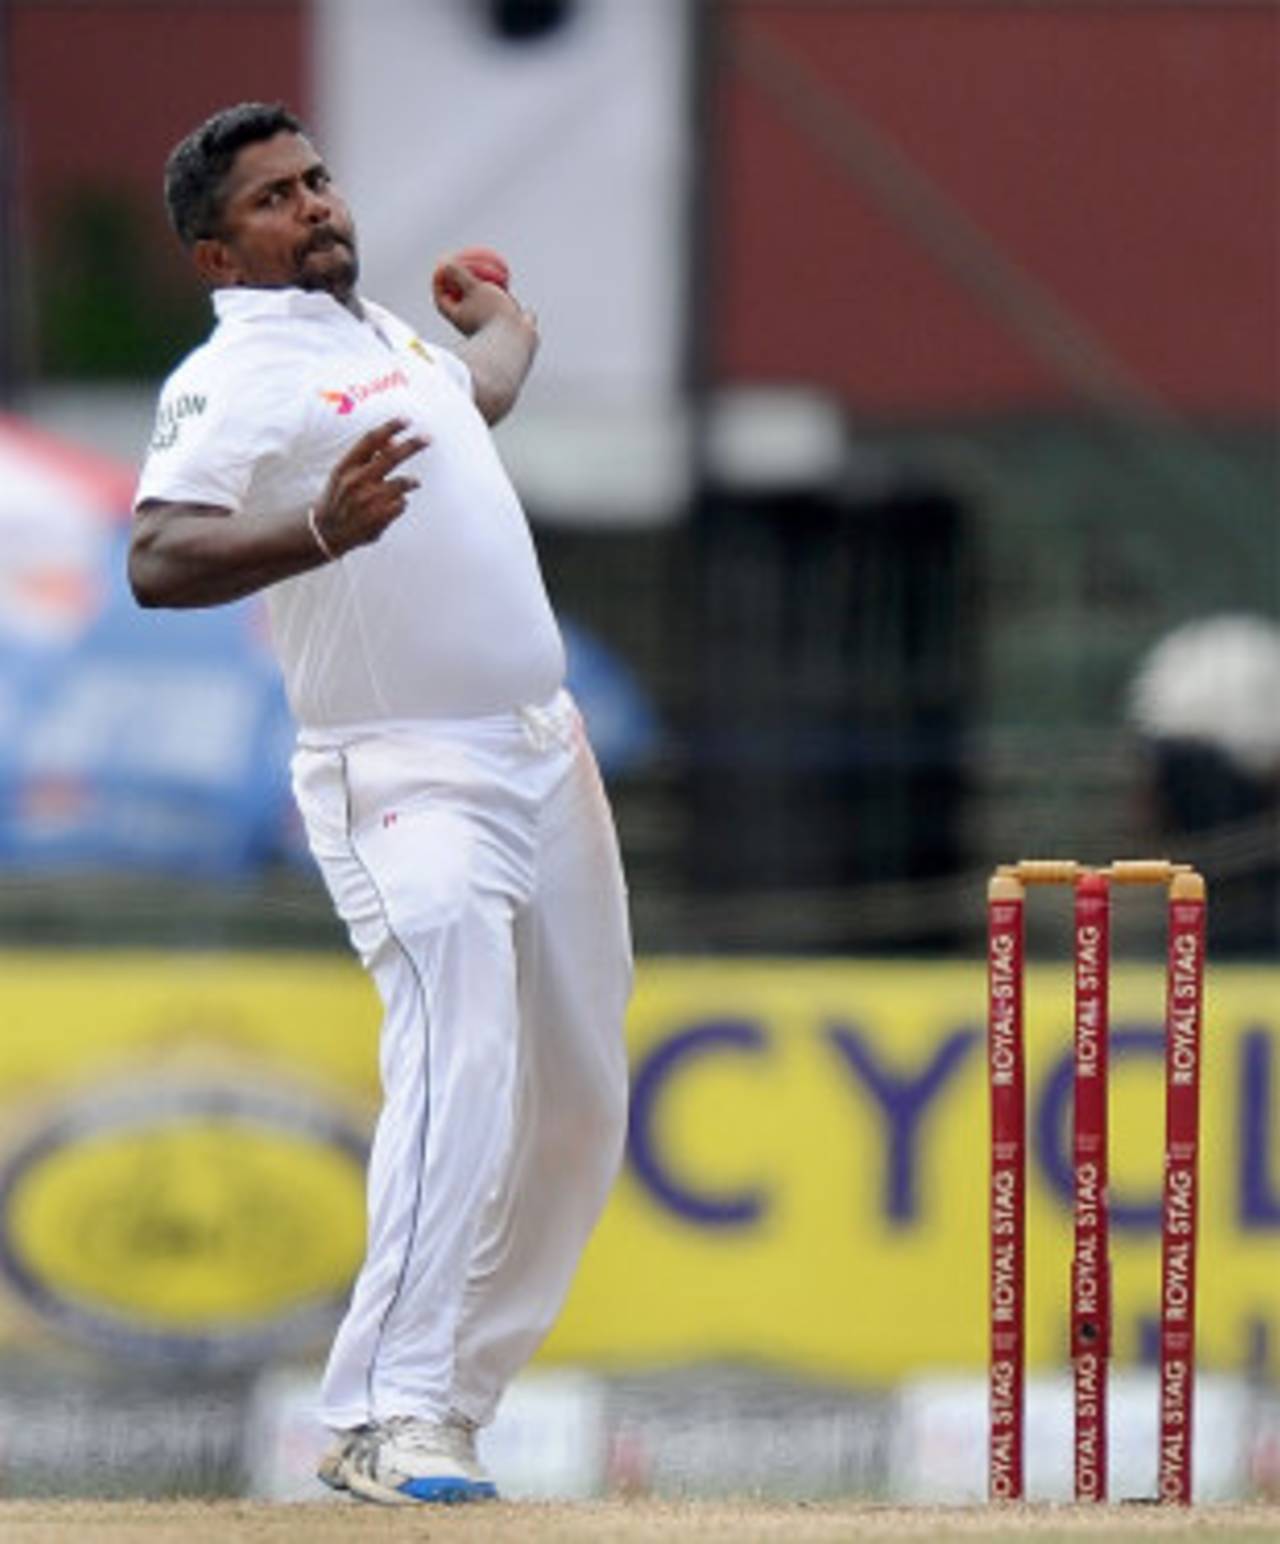 Rangana Herath bowled 45 overs and took four wickets, Sri Lanka v South Africa, 2nd Test, Colombo, 3rd day, July 26, 2014